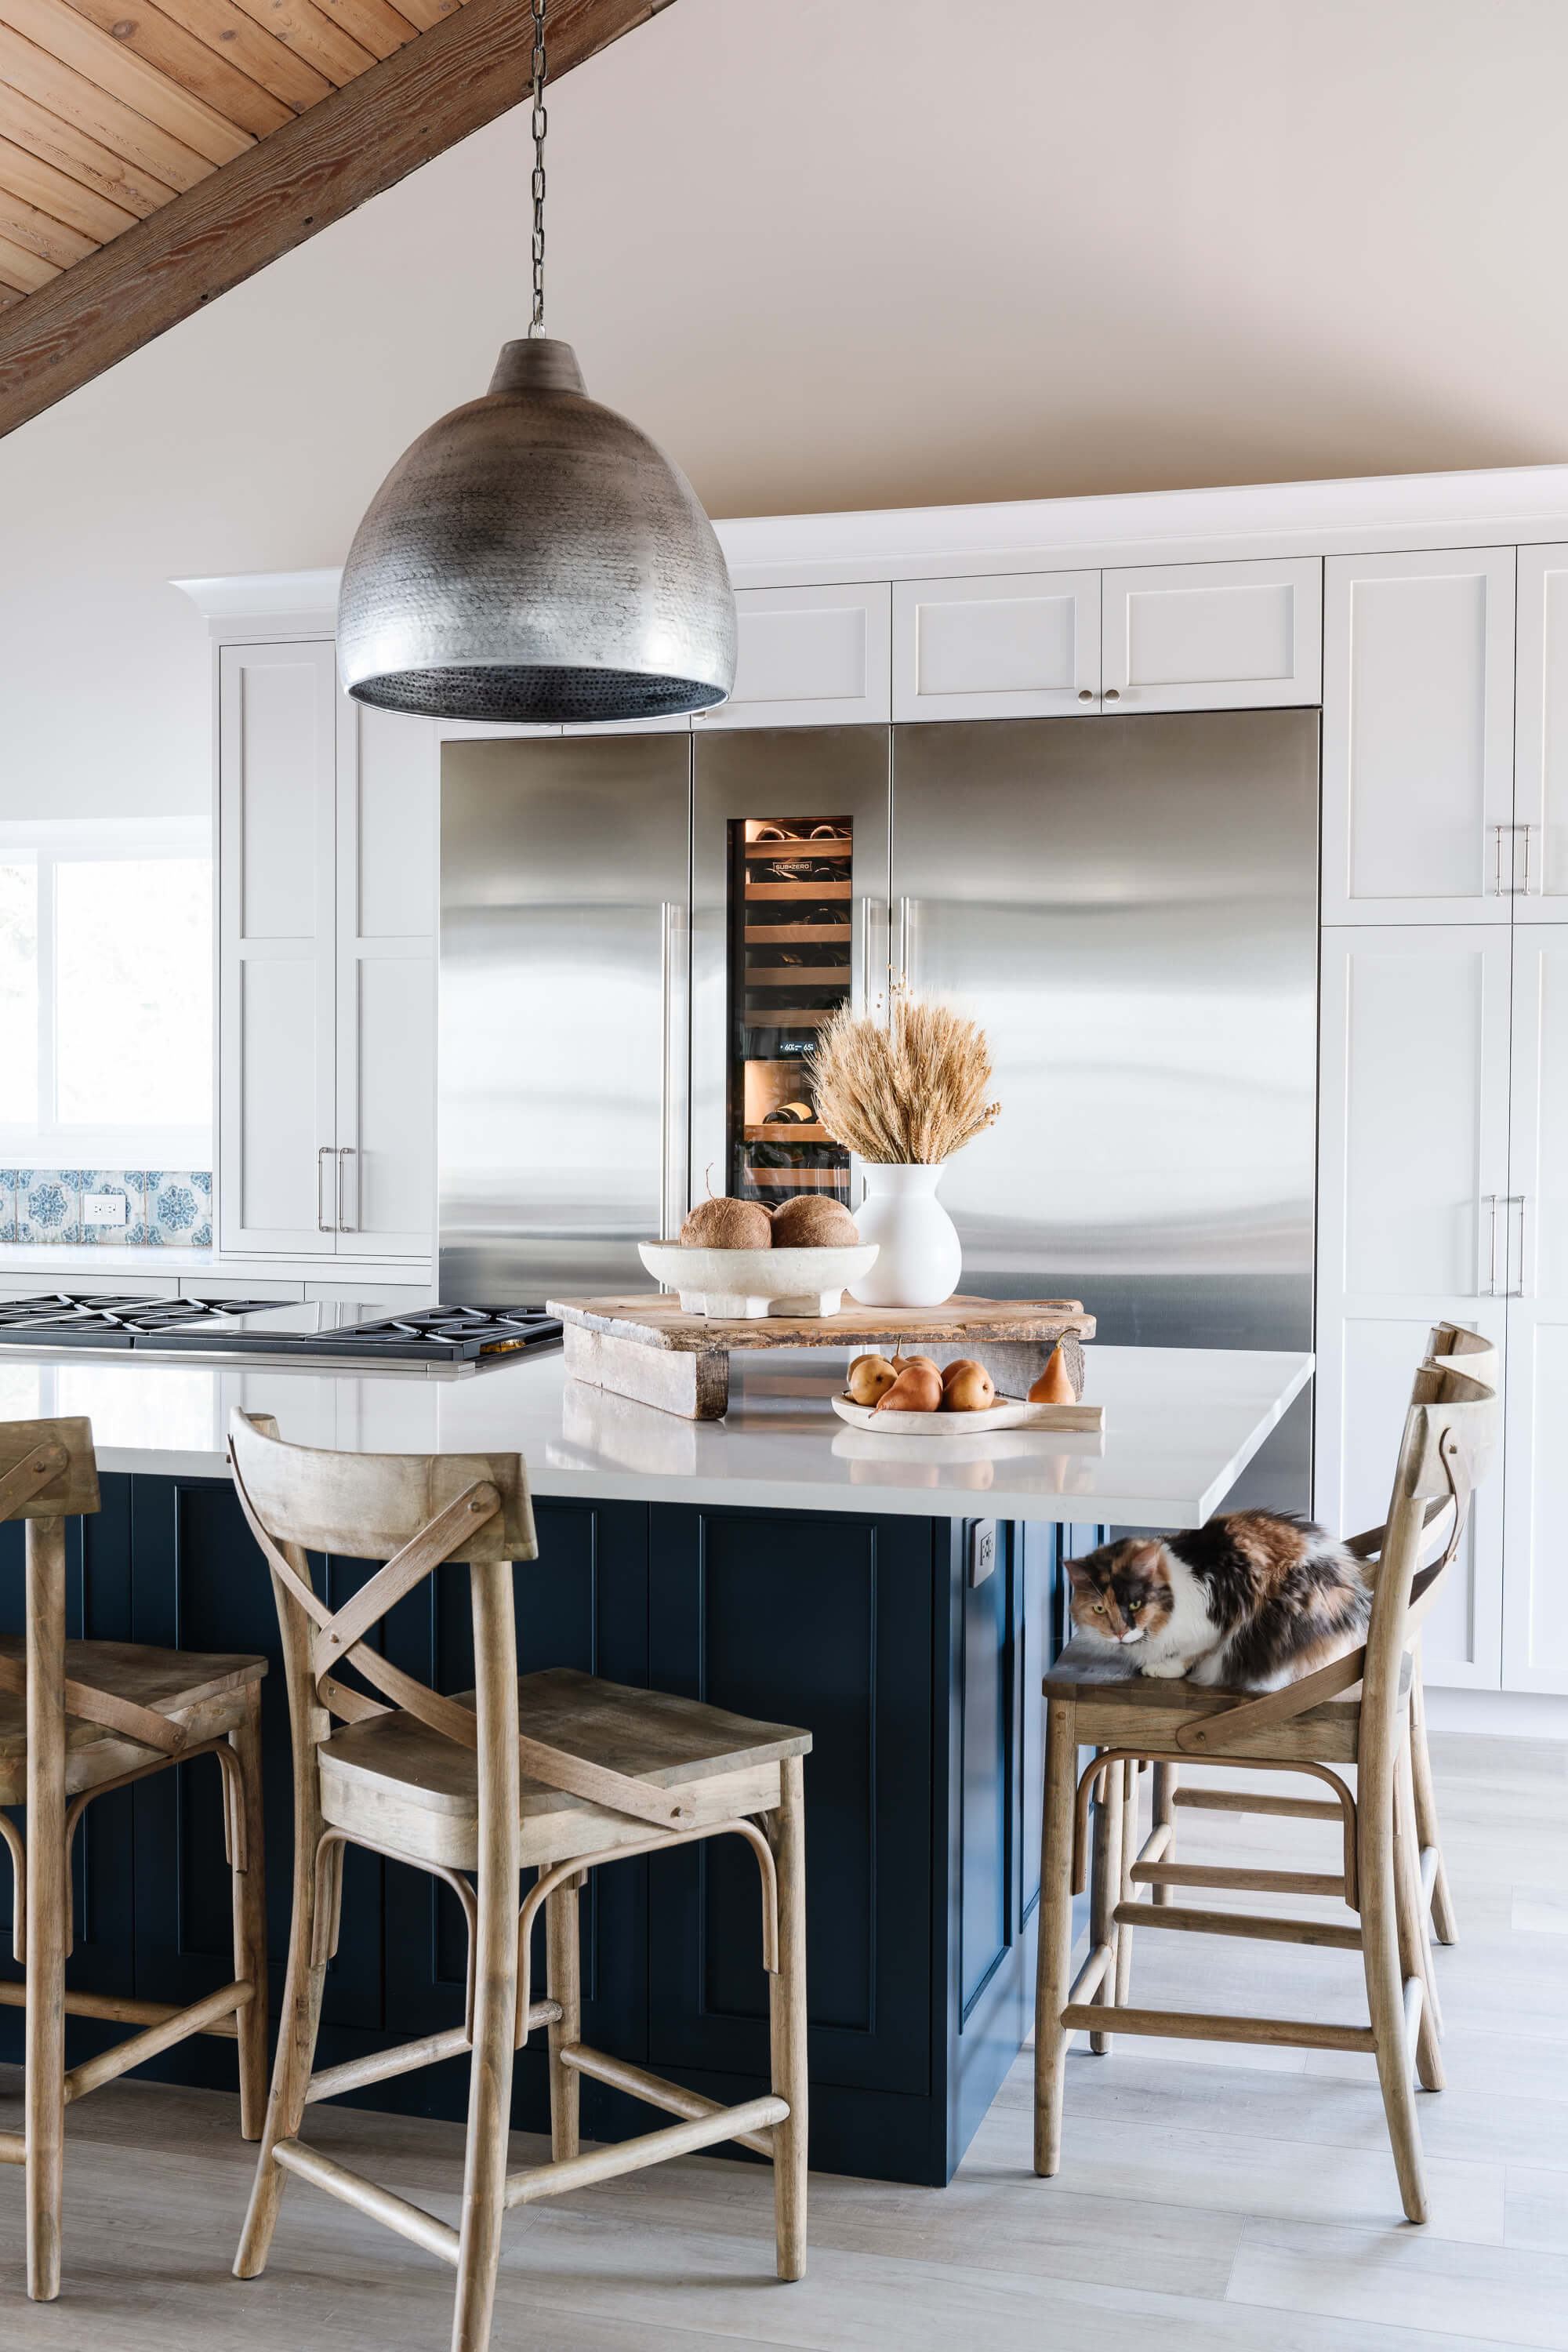 A beautiful kitchen design with white cabinets for the perimeter and dark, navy blue painted kitchen island.